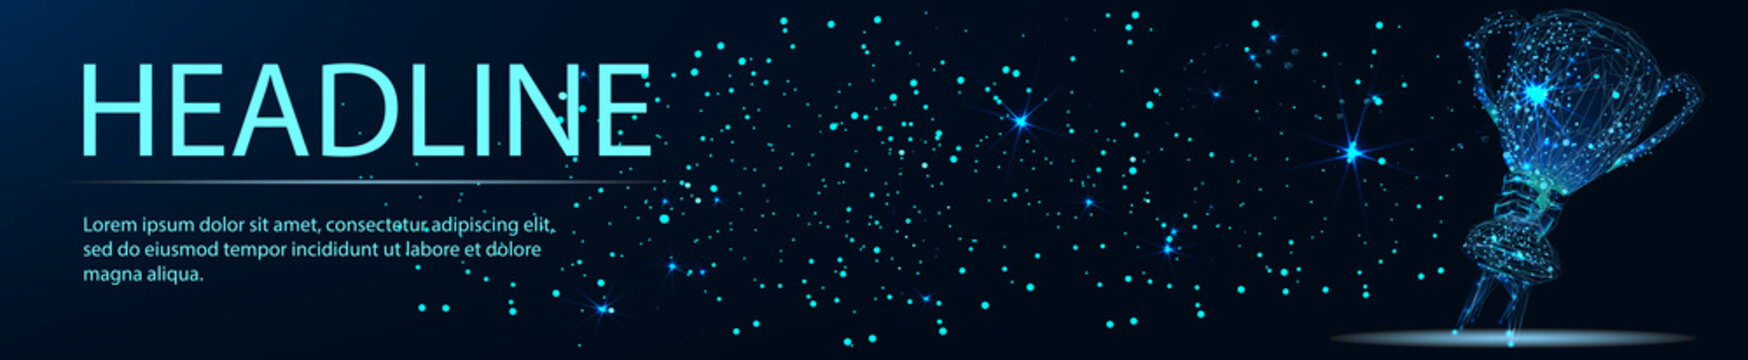 trophy cup. Polygonal wireframe  low poly Vector, Banner. Abstract image of a starry sky or space, consisting of points, lines, n the form of stars and the universe. Low poly vector